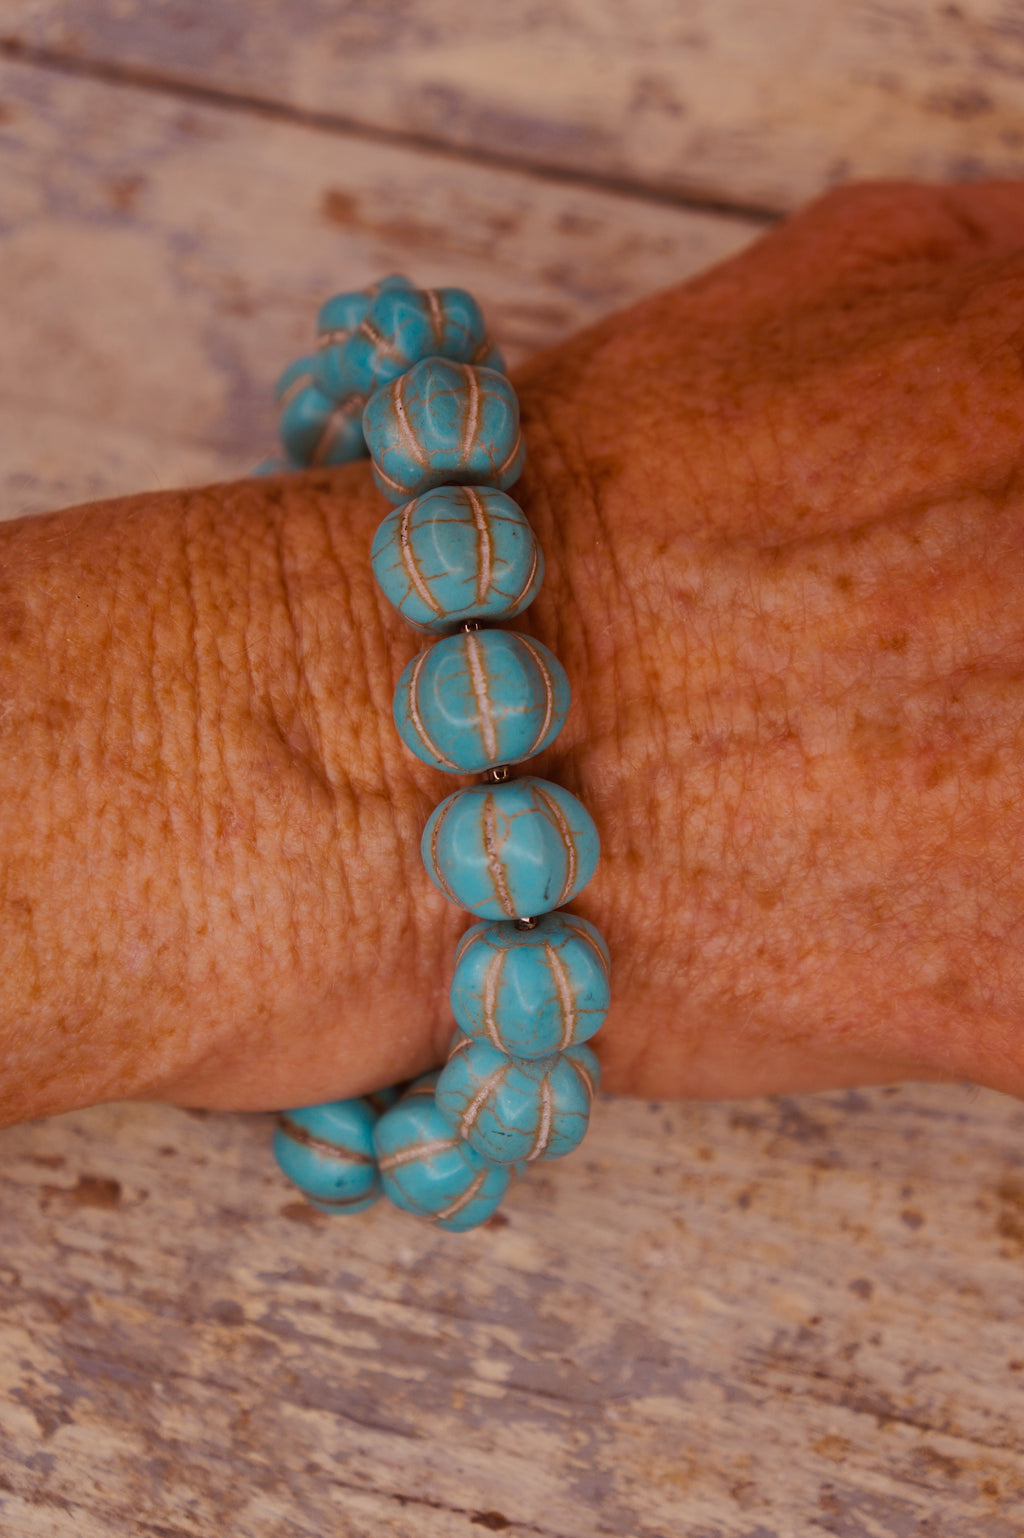 Turquoise Colored Bracelet